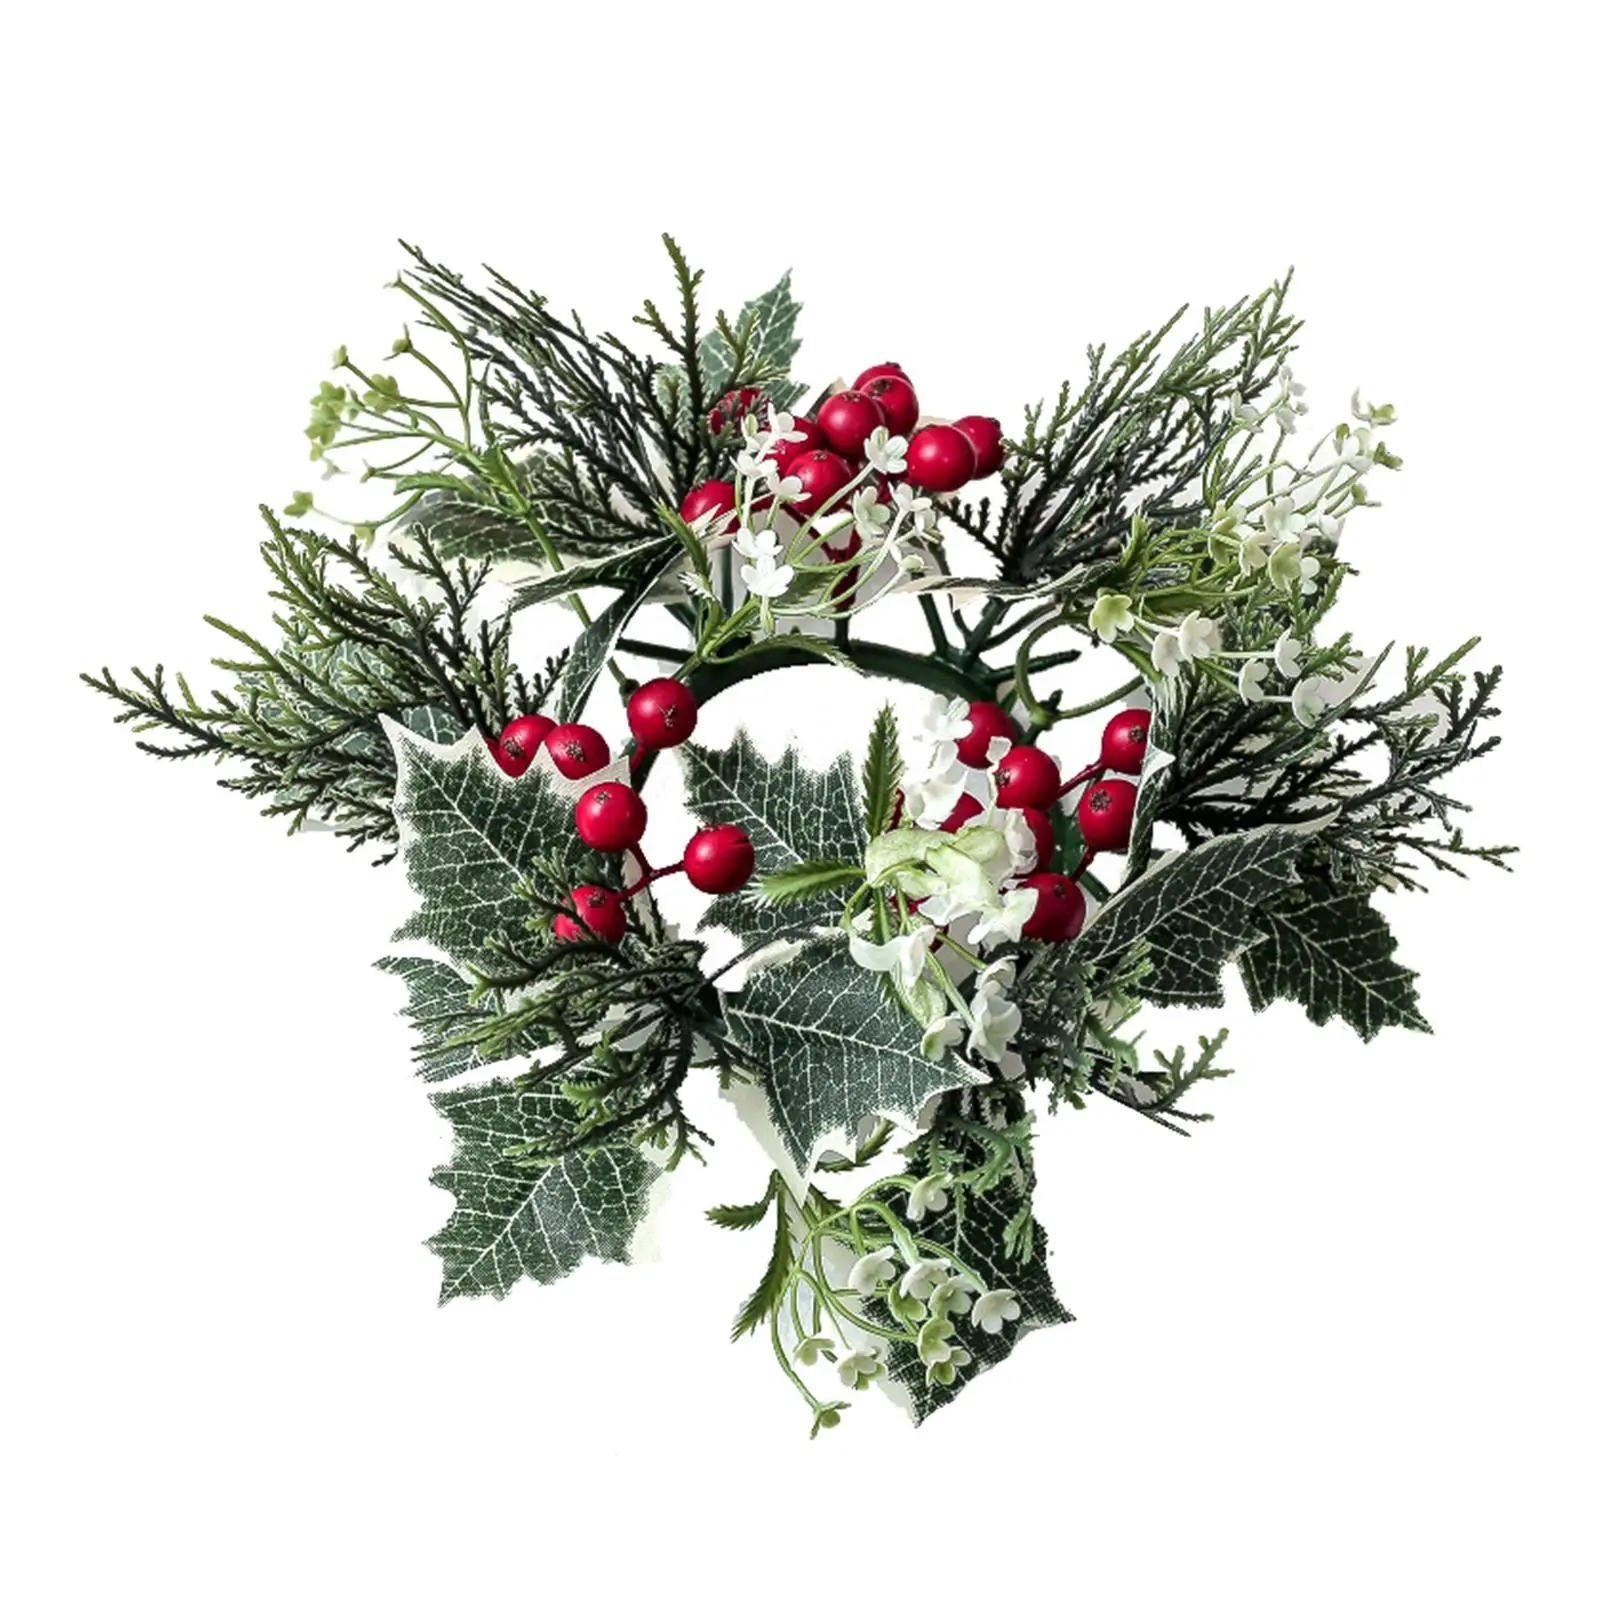 Candle Rings Wreath Christmas Candle Rings Garland for Wedding, Party, Home